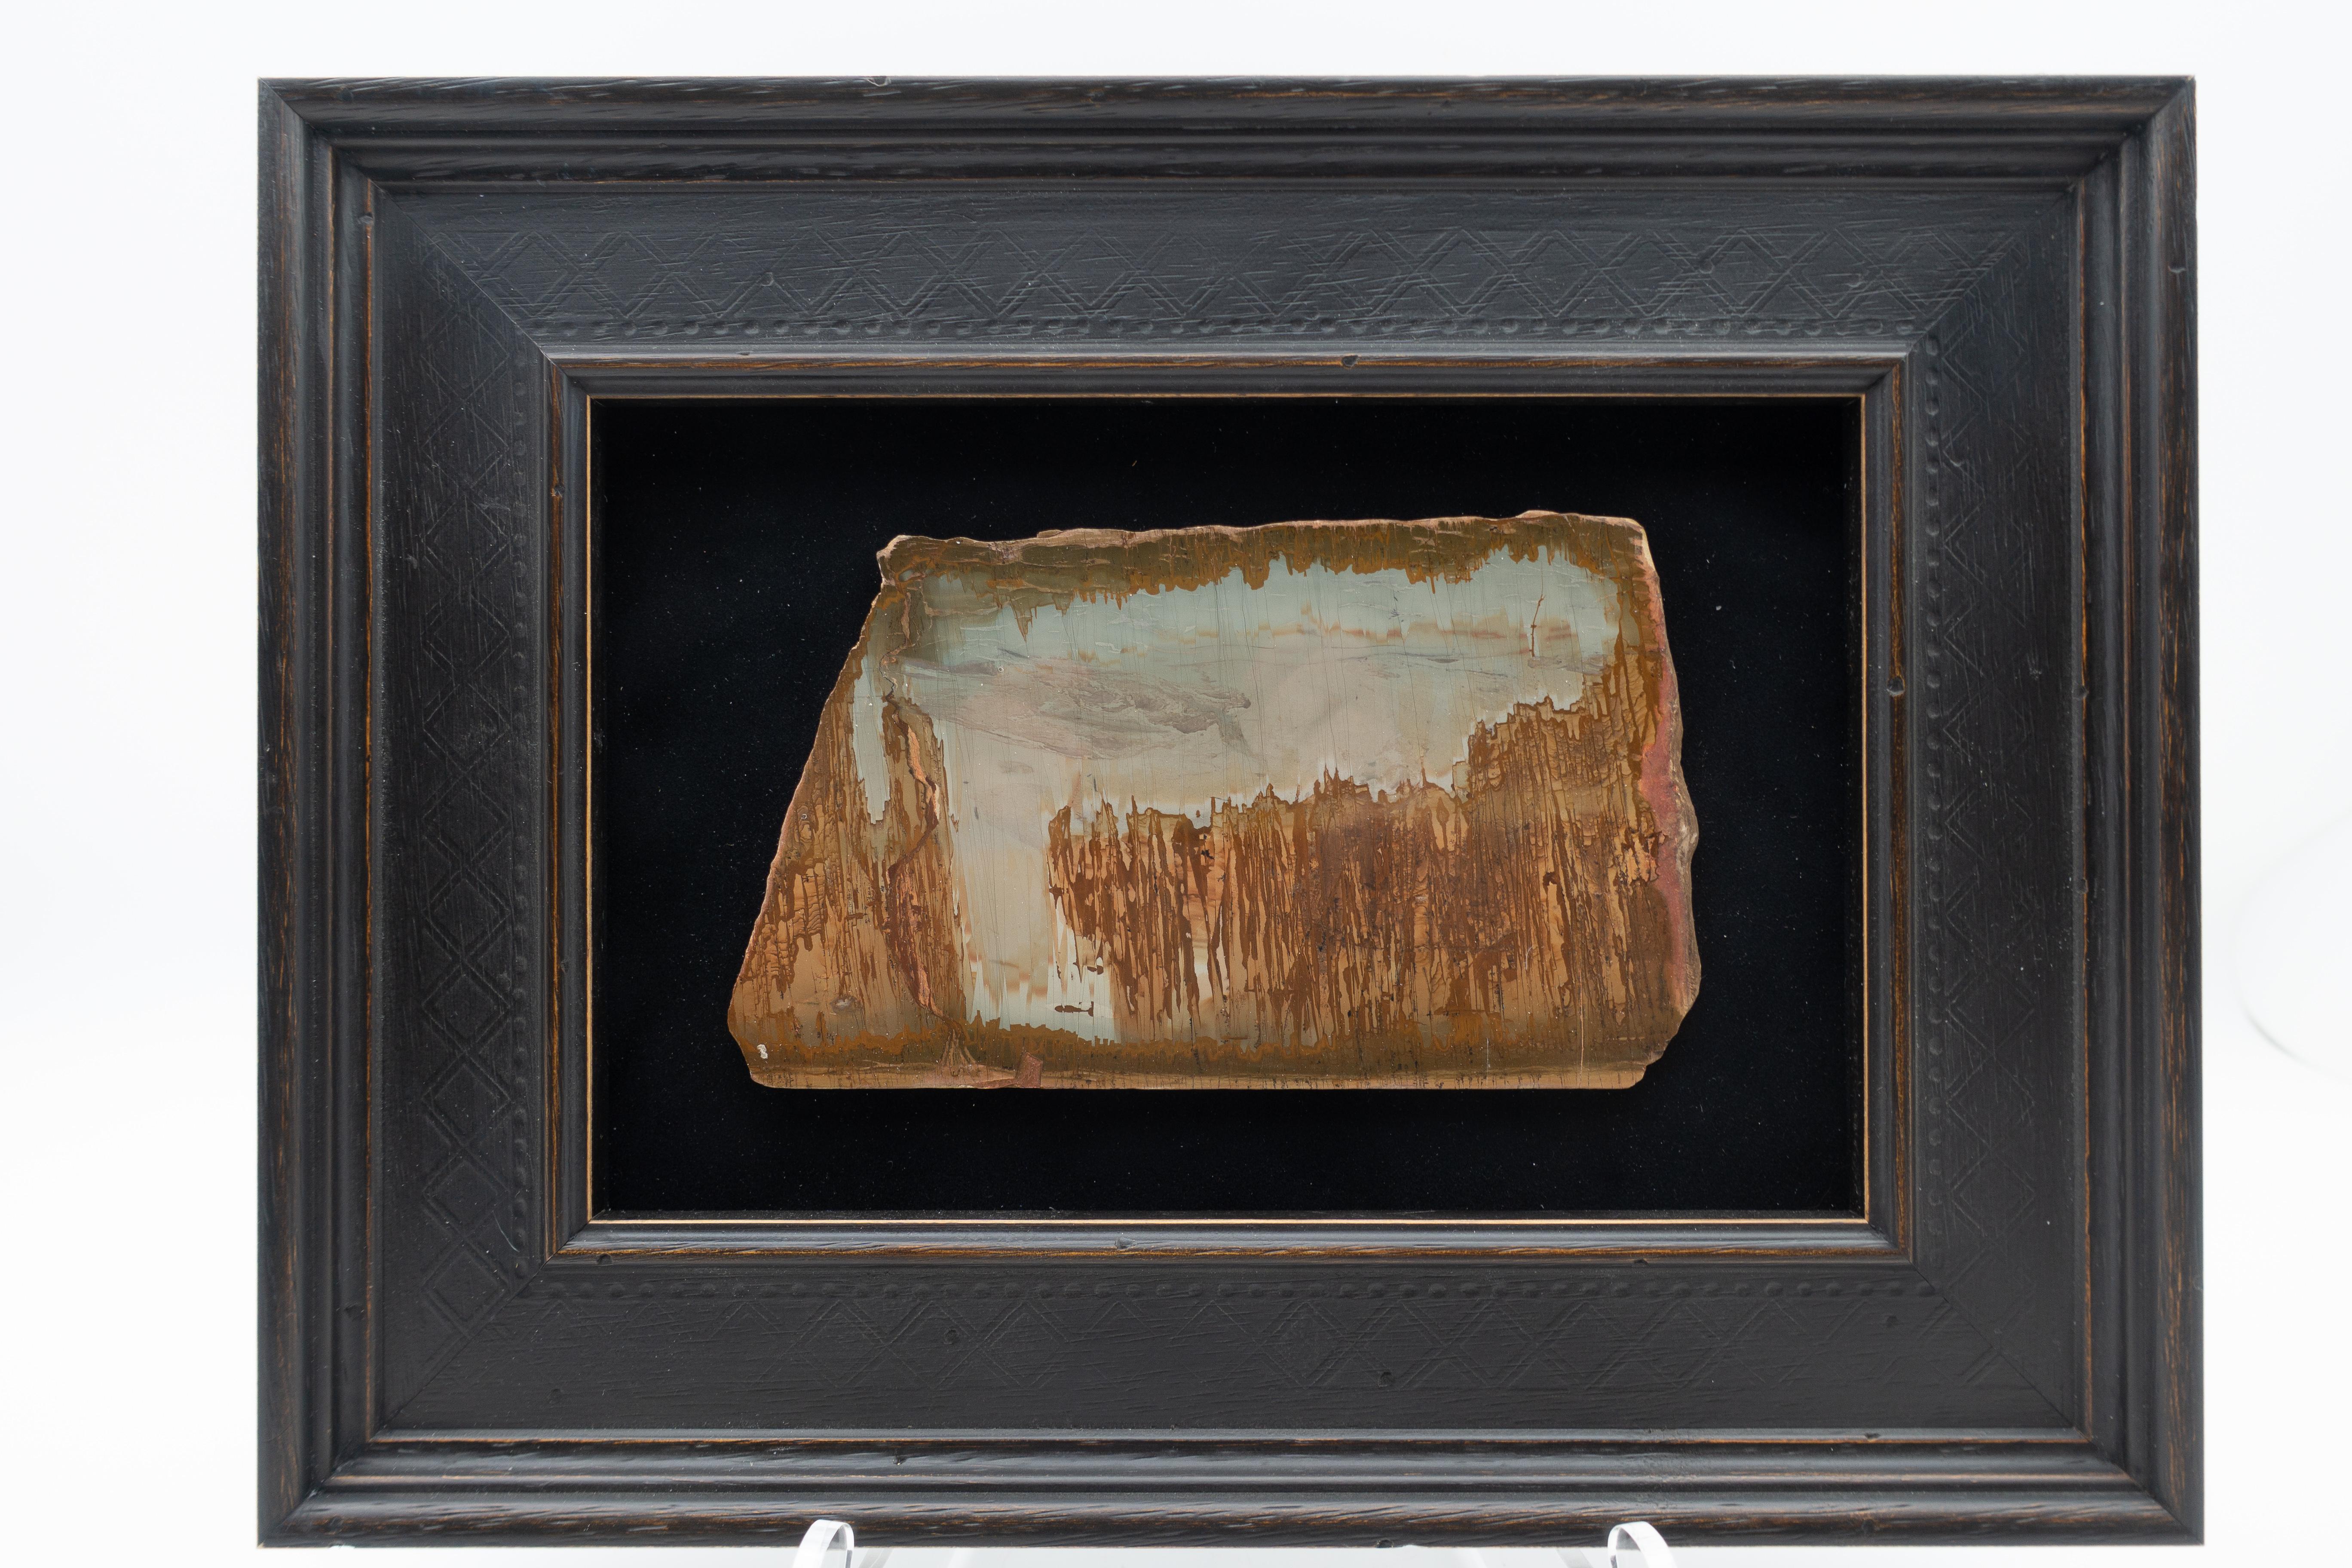 Framed slice of pietra paesina, also known as landscape stone or ruin marble. Pietra paesina is a kind of limestone or marble originating mostly from Florence territory, whose natural appearance gives the impression of a ruined landscape painting.